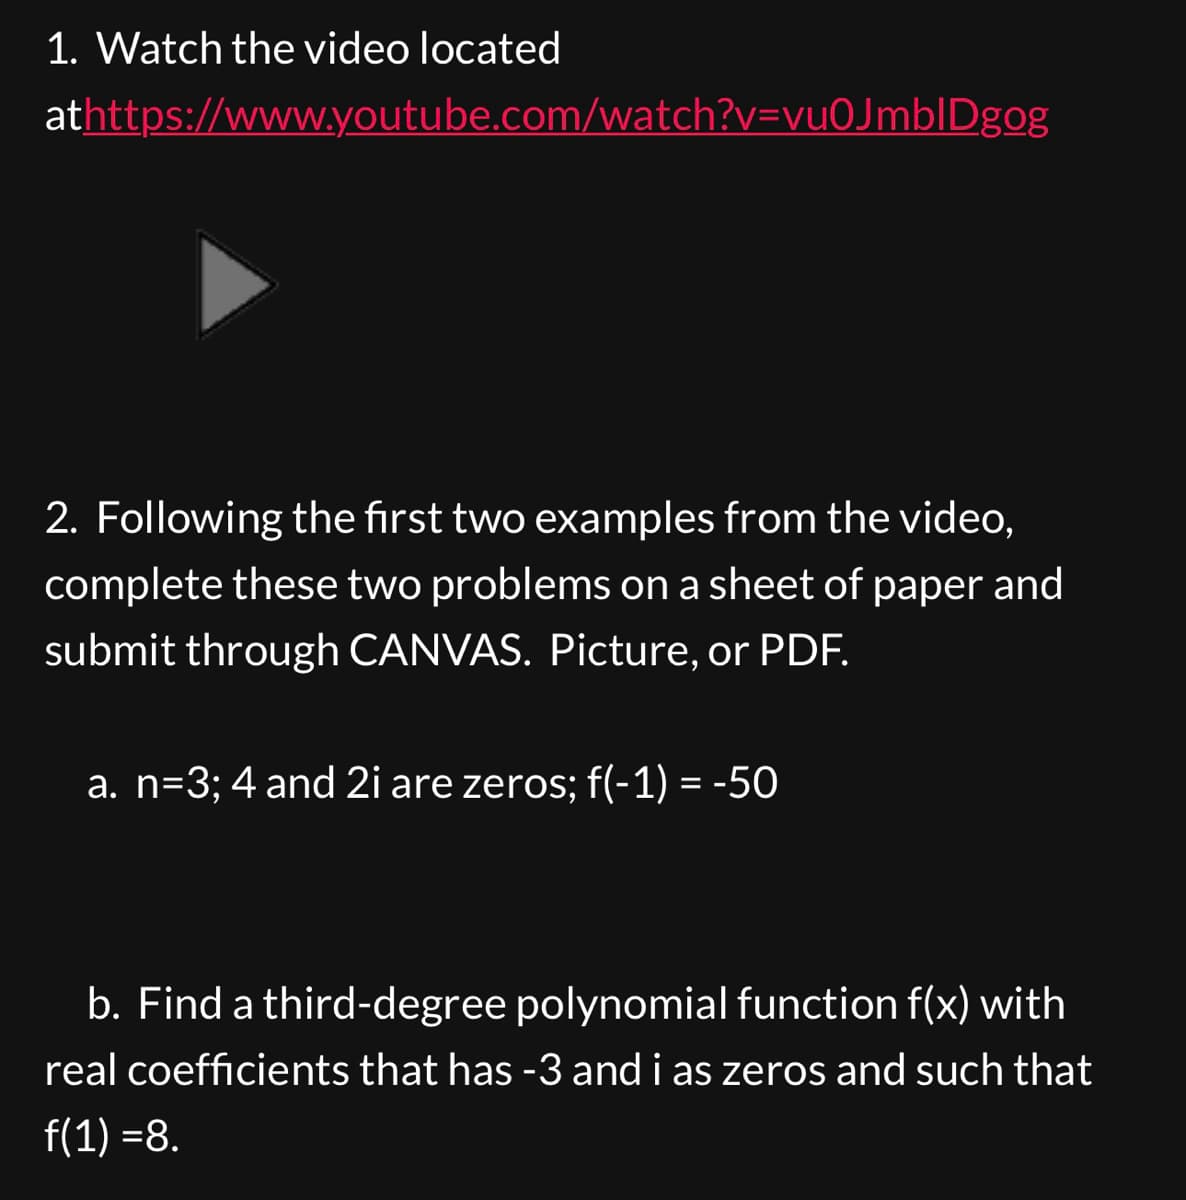 1. Watch the video located
athttps://www.youtube.com/watch?v=vu0JmblDgog
2. Following the first two examples from the video,
complete these two problems on a sheet of paper and
submit through CANVAS. Picture, or PDF.
a. n=3; 4 and 2i are zeros; f(-1) = -50
b. Find a third-degree polynomial function f(x) with
real coefficients that has -3 and i as zeros and such that
f(1) =8.